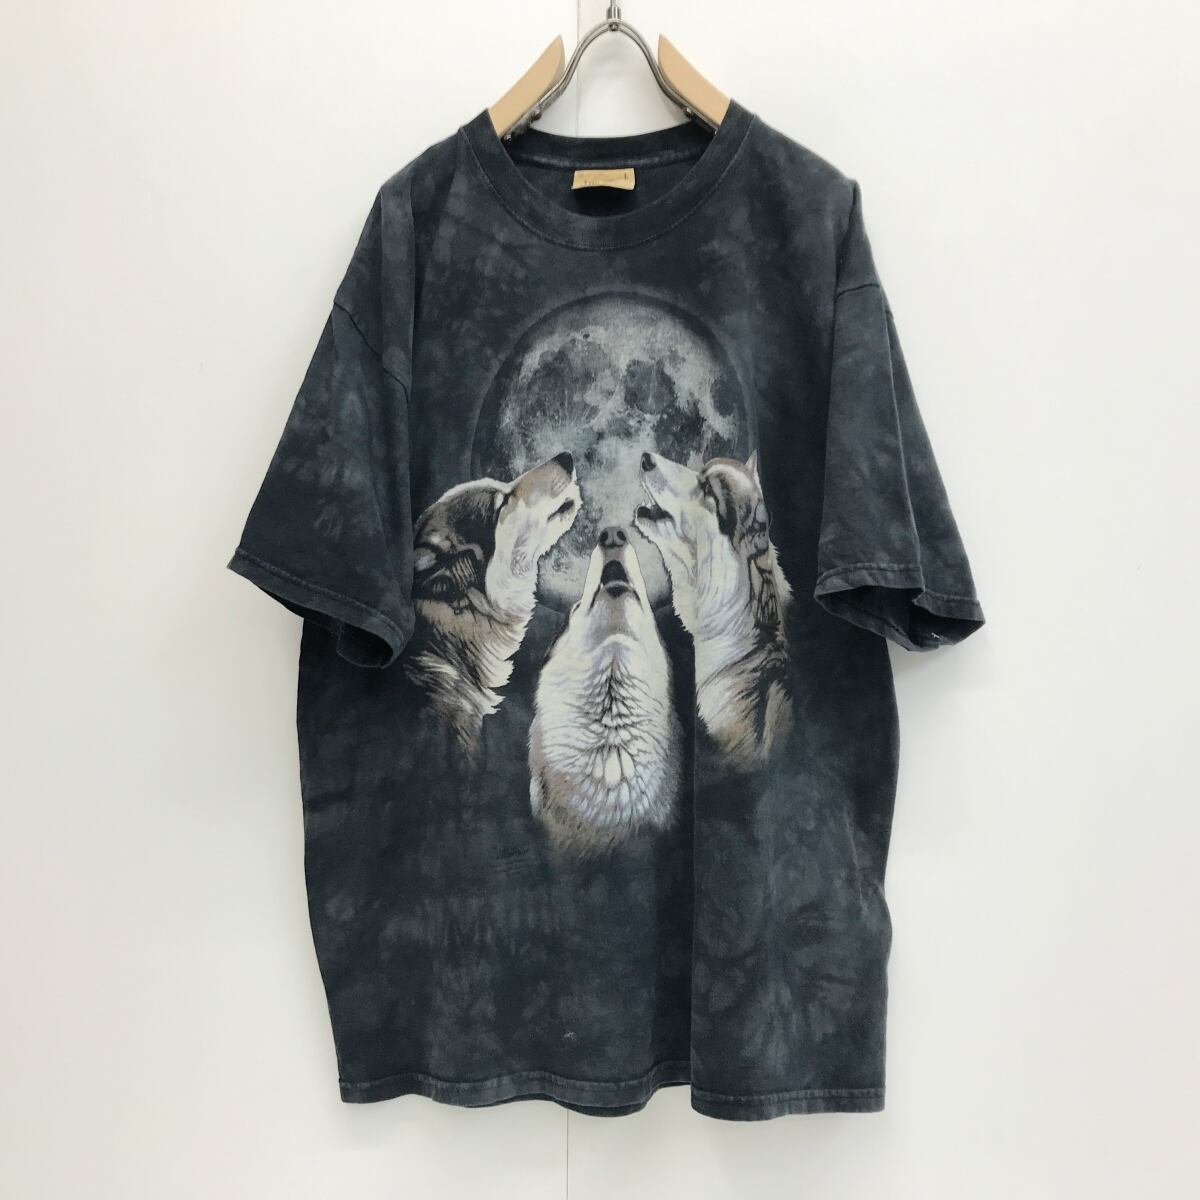 USED　00' 『RED RIVER』　Vintage　プリントTシャツ